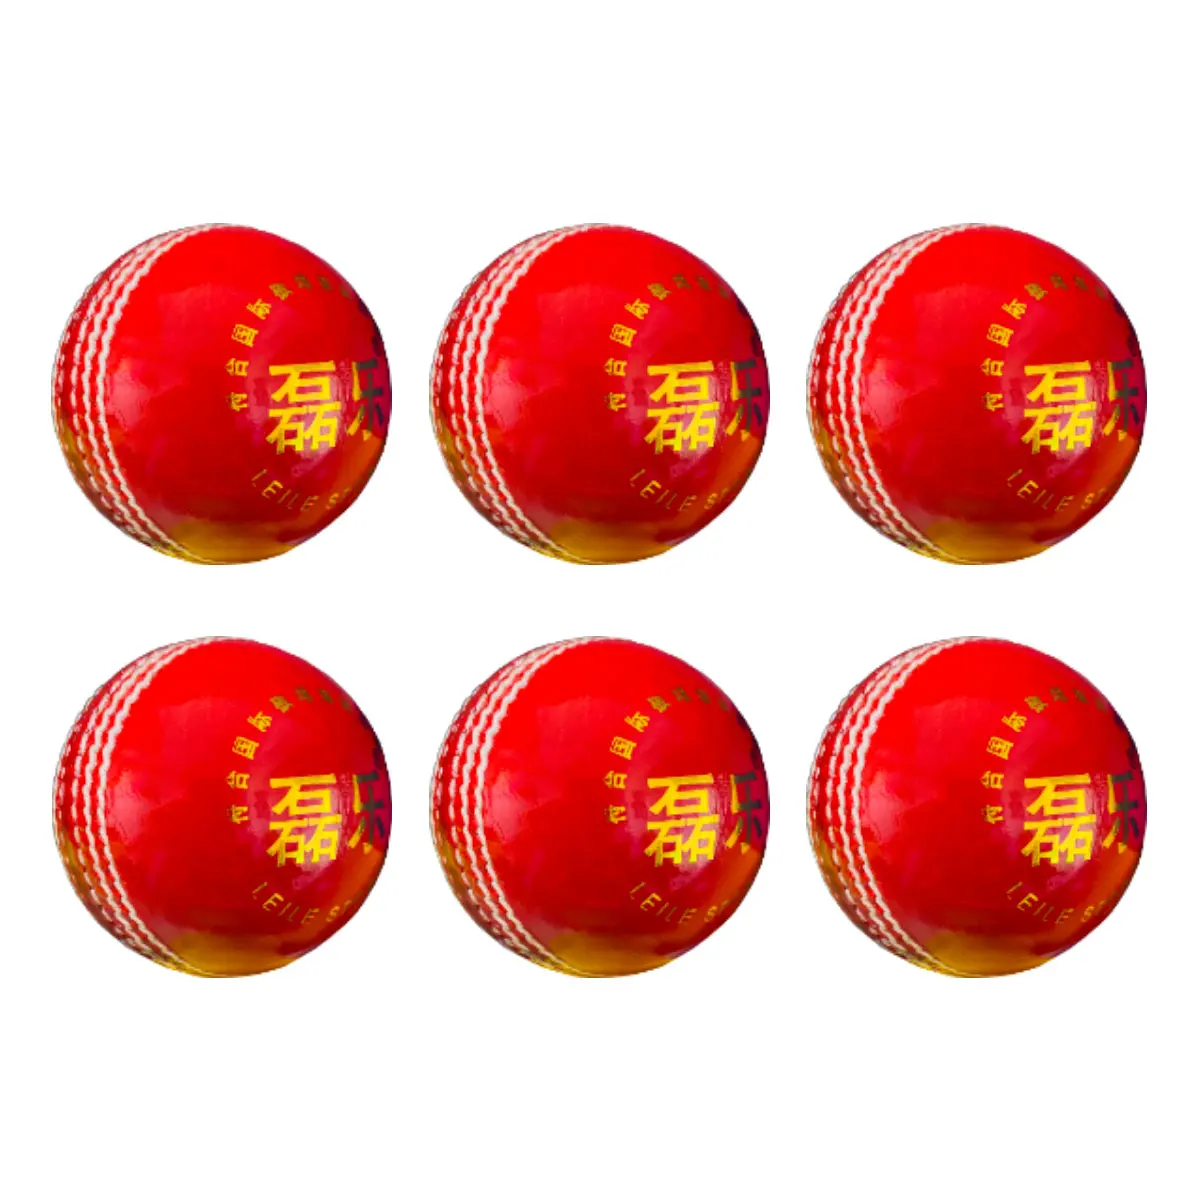 6Piece Red Cricket Ball Pack of 6 Genuine Leather Cricket Balls for International Standard Cricket and Practice Hard Ball